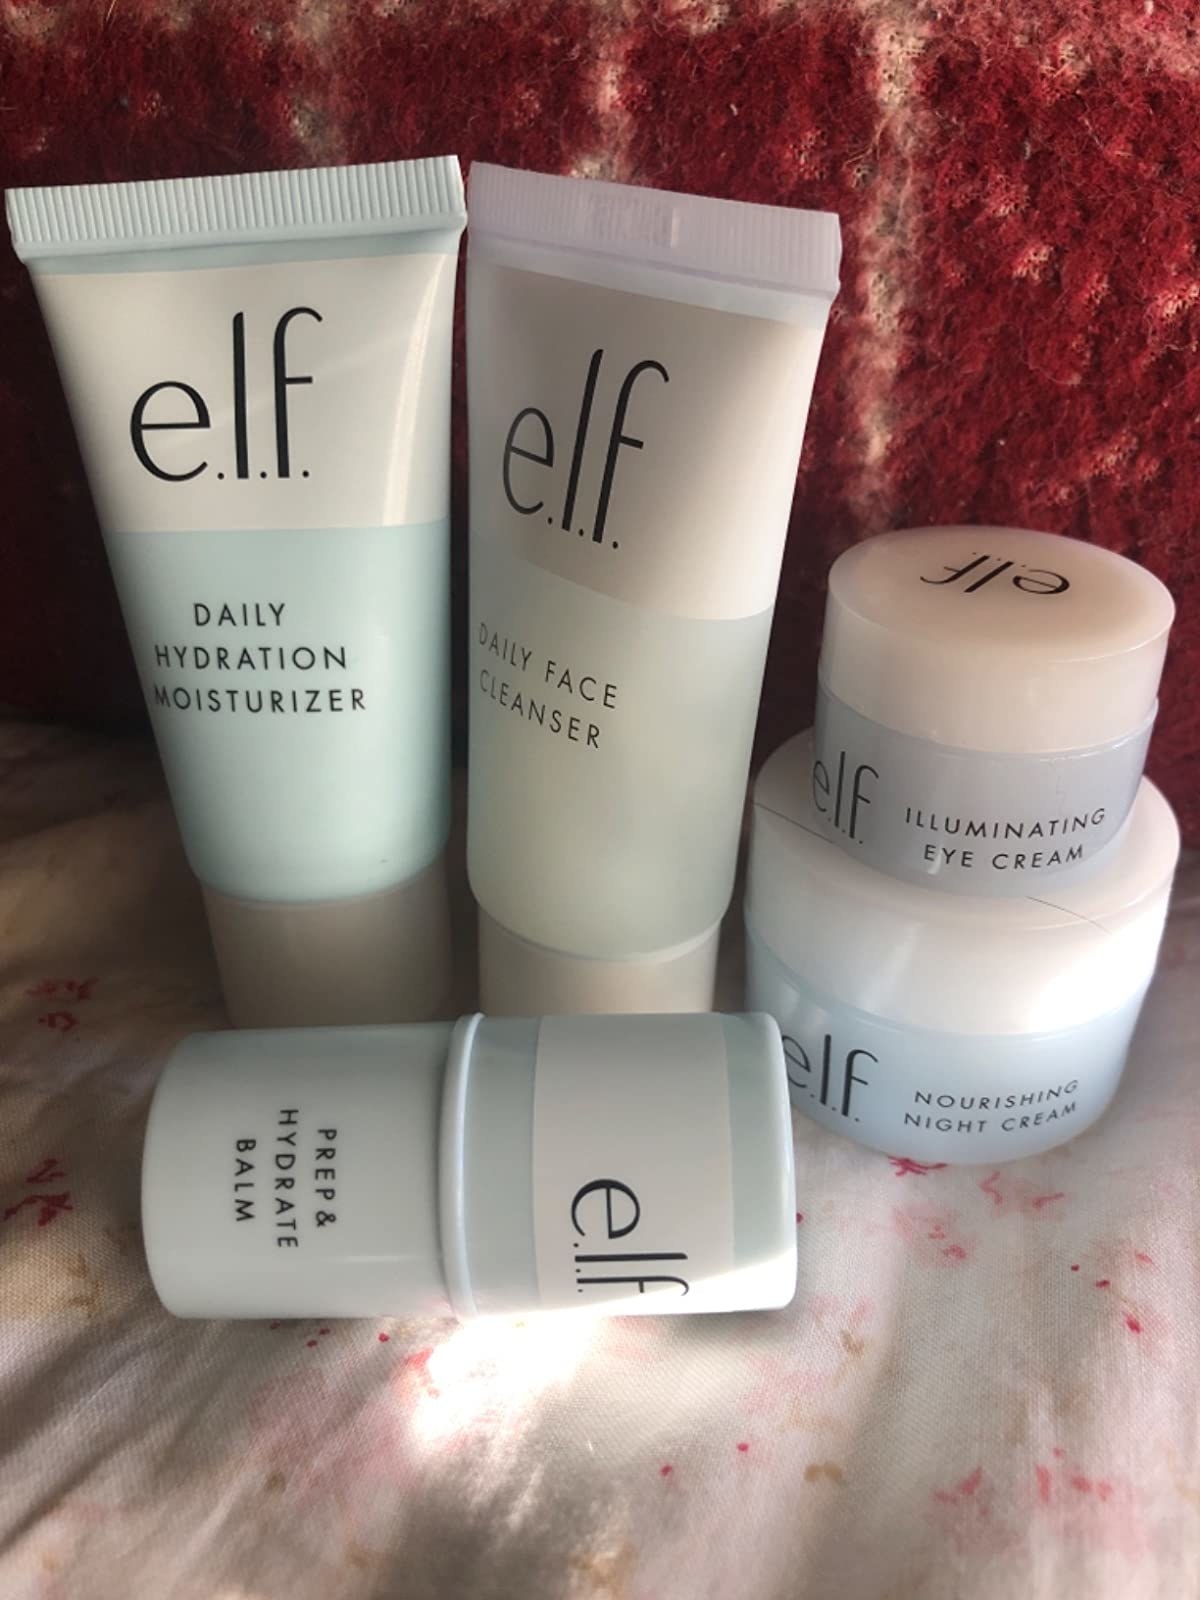 the full kit with daily hydration moisturizer, daily face cleanser, illuminating eye cream, nourishing night cream, and prep and hydrate balm